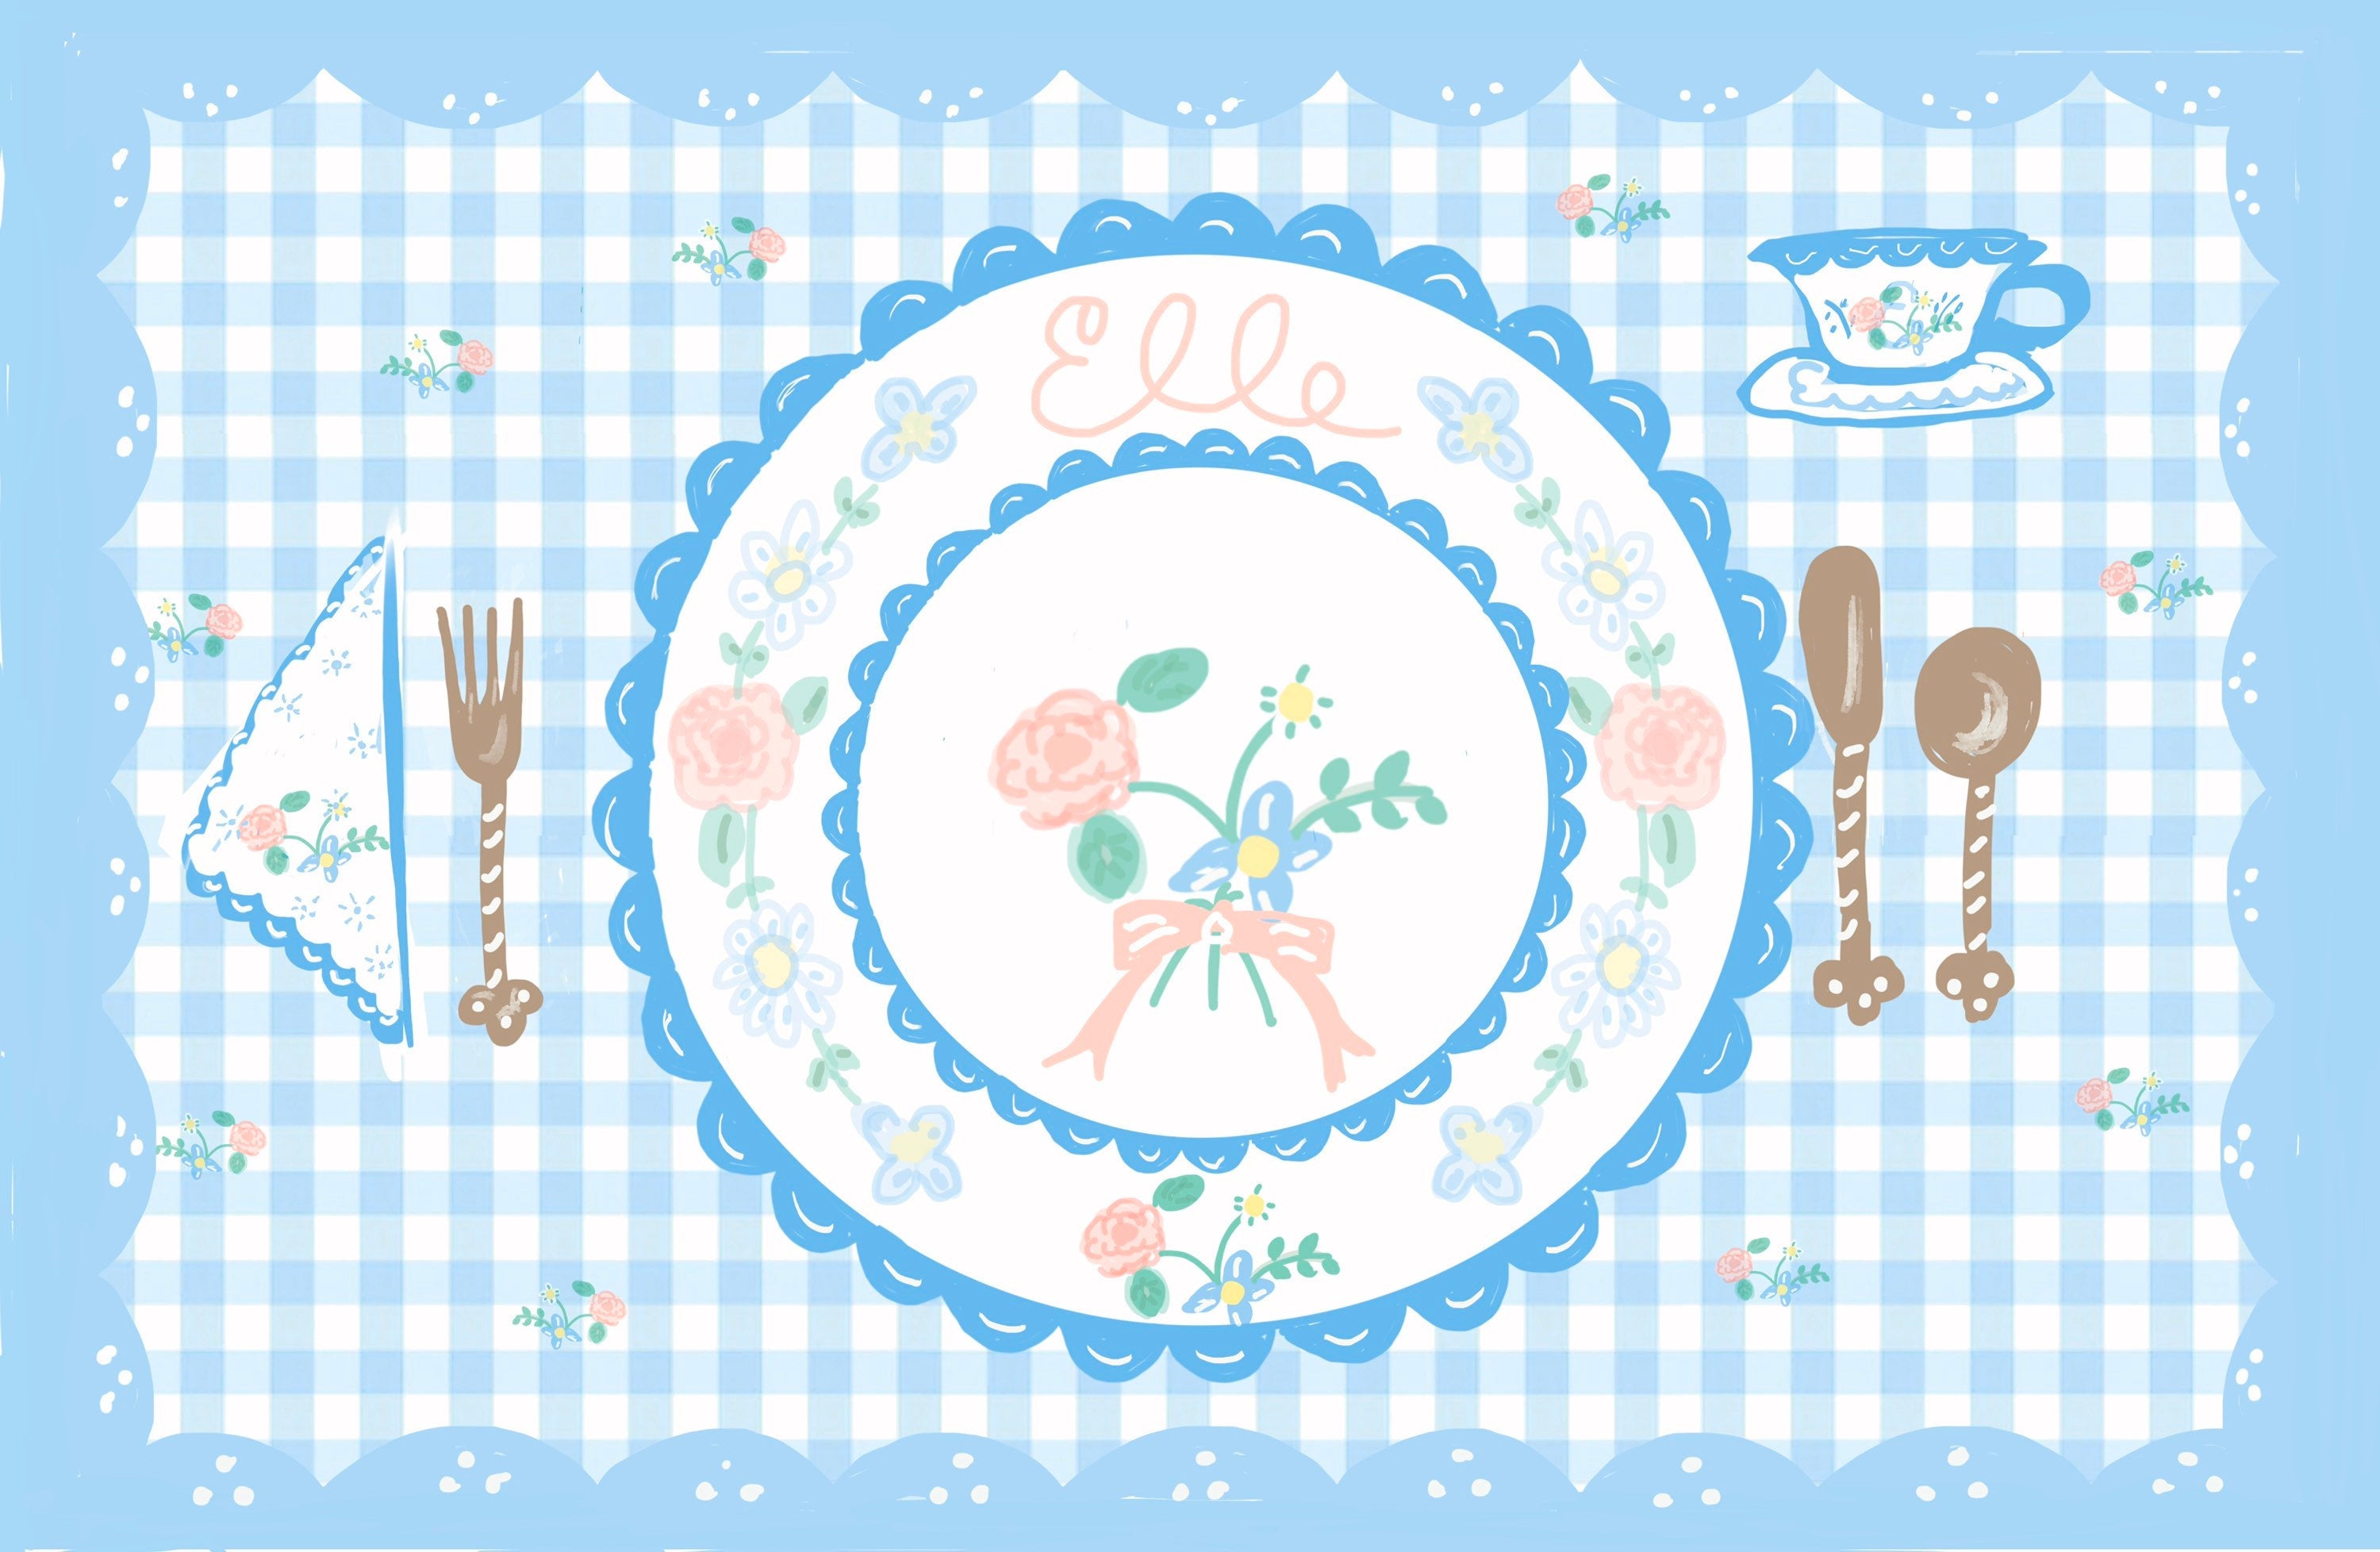 Laminated Placemat - Pastel Blue Gingham (Collaboration with Born on Fifth) - Tricia Lowenfield Design